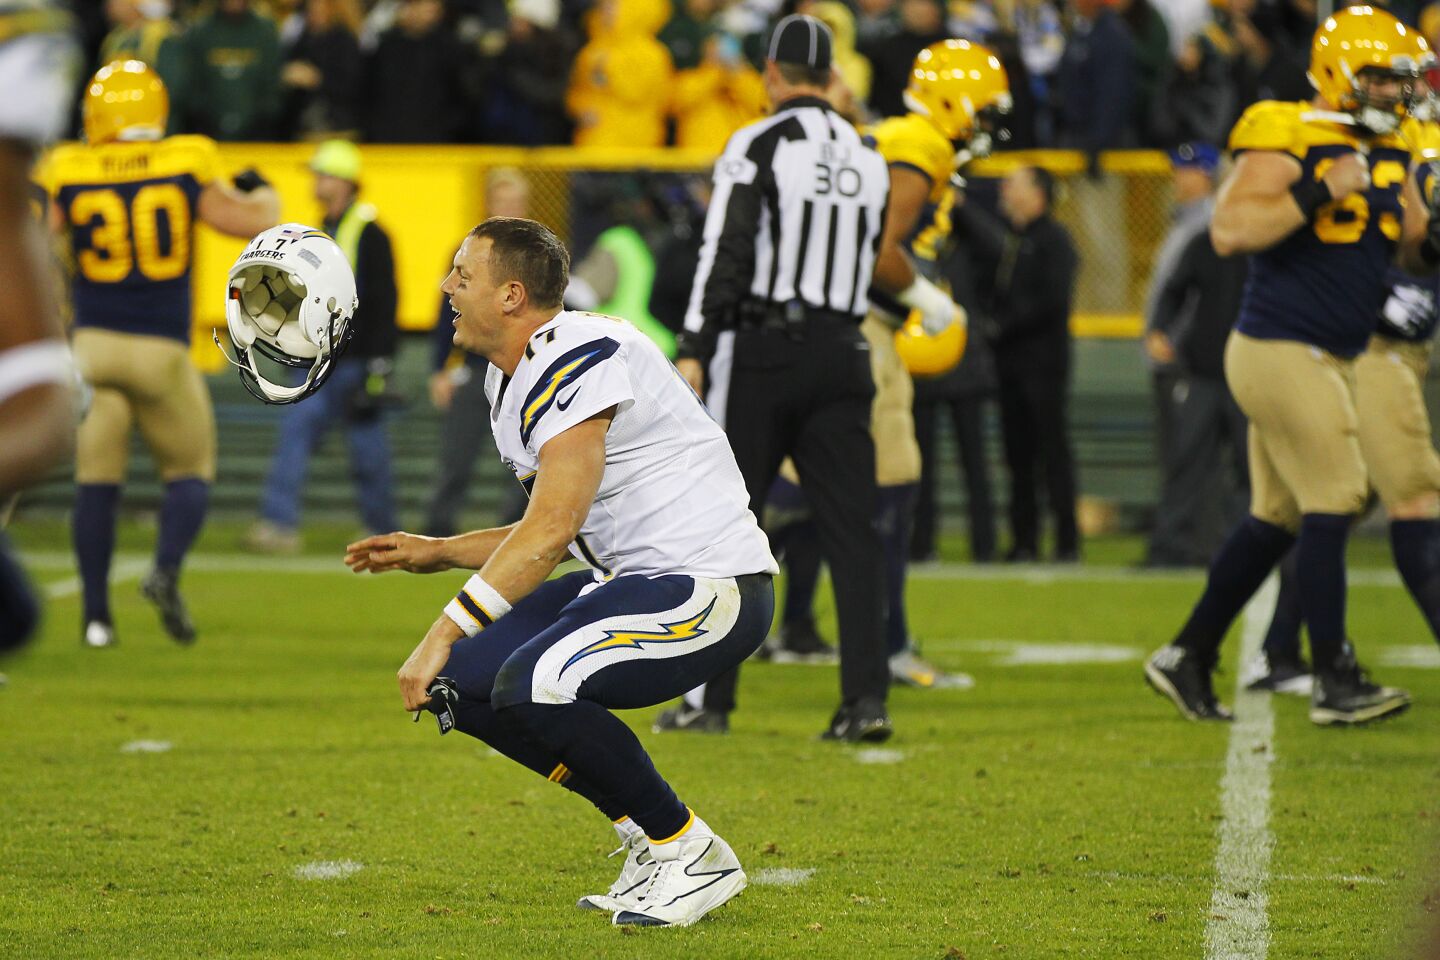 Chargers Philip Rivers flips his helmet at the end of a 27-20 loss to the Packers in Green Bay on Oct. 18, 2015.